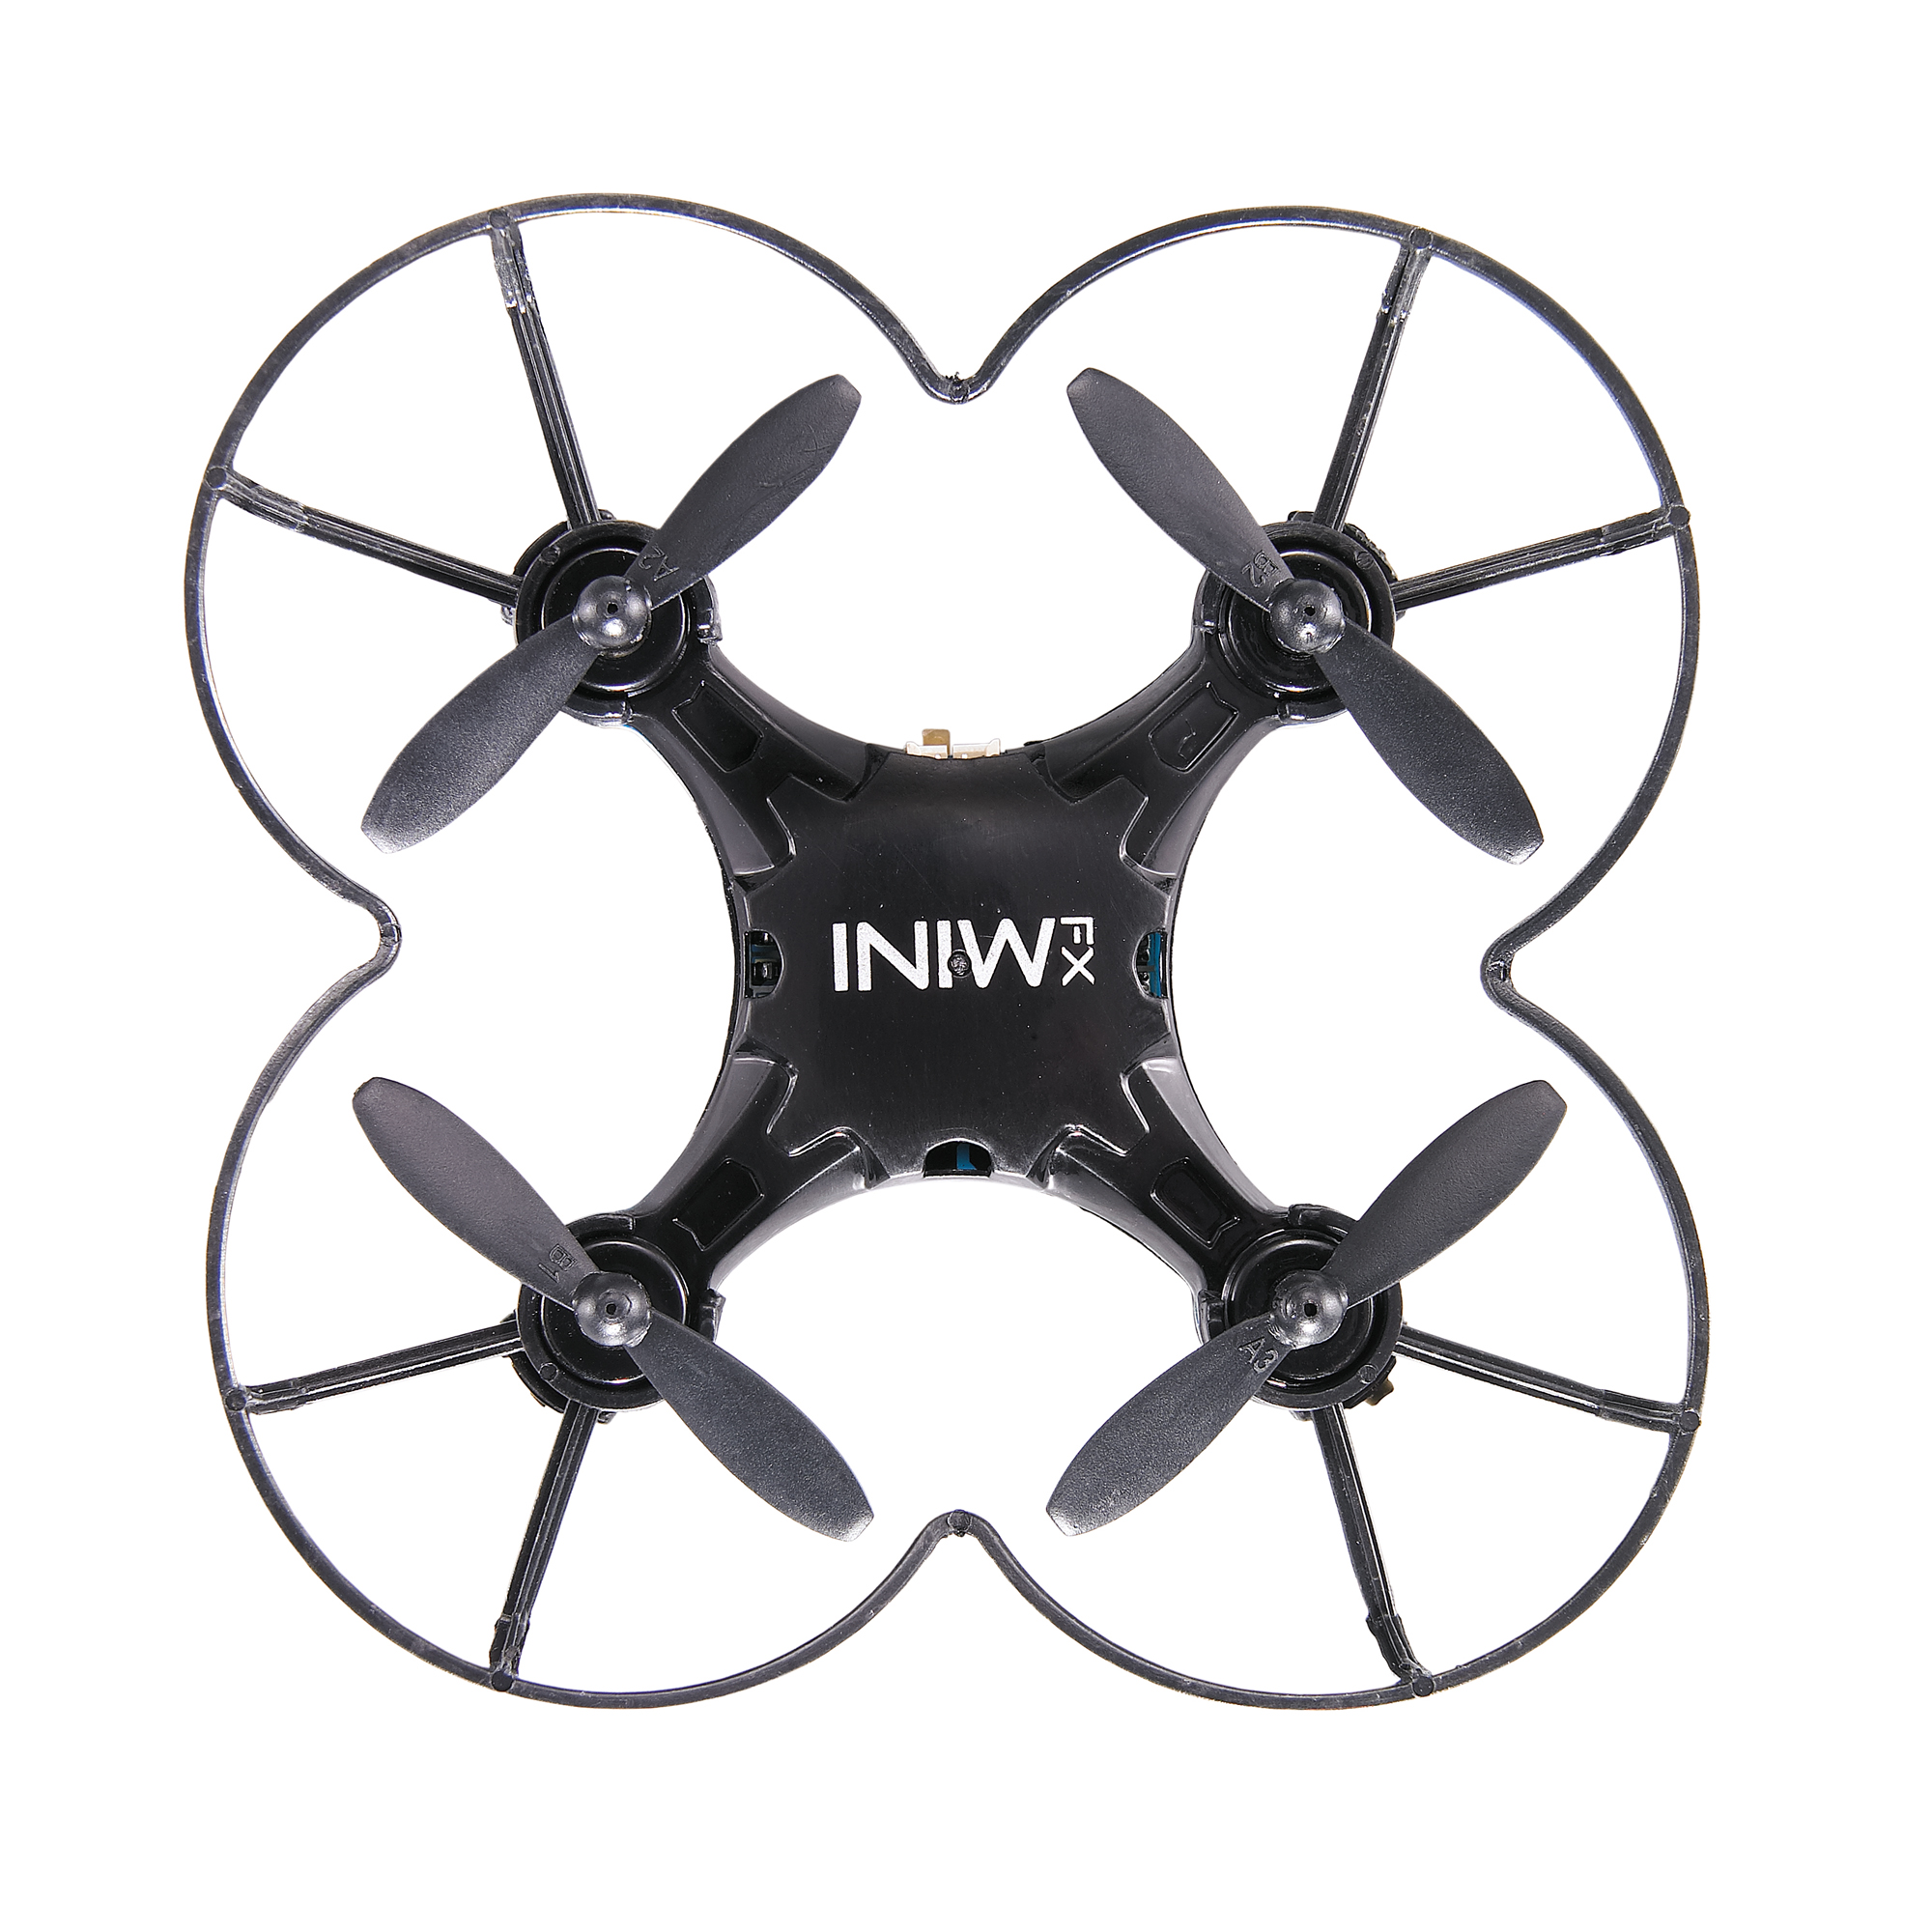 SkyDrones- FX Mini Pocket Drone (Color may vary) - image 3 of 6